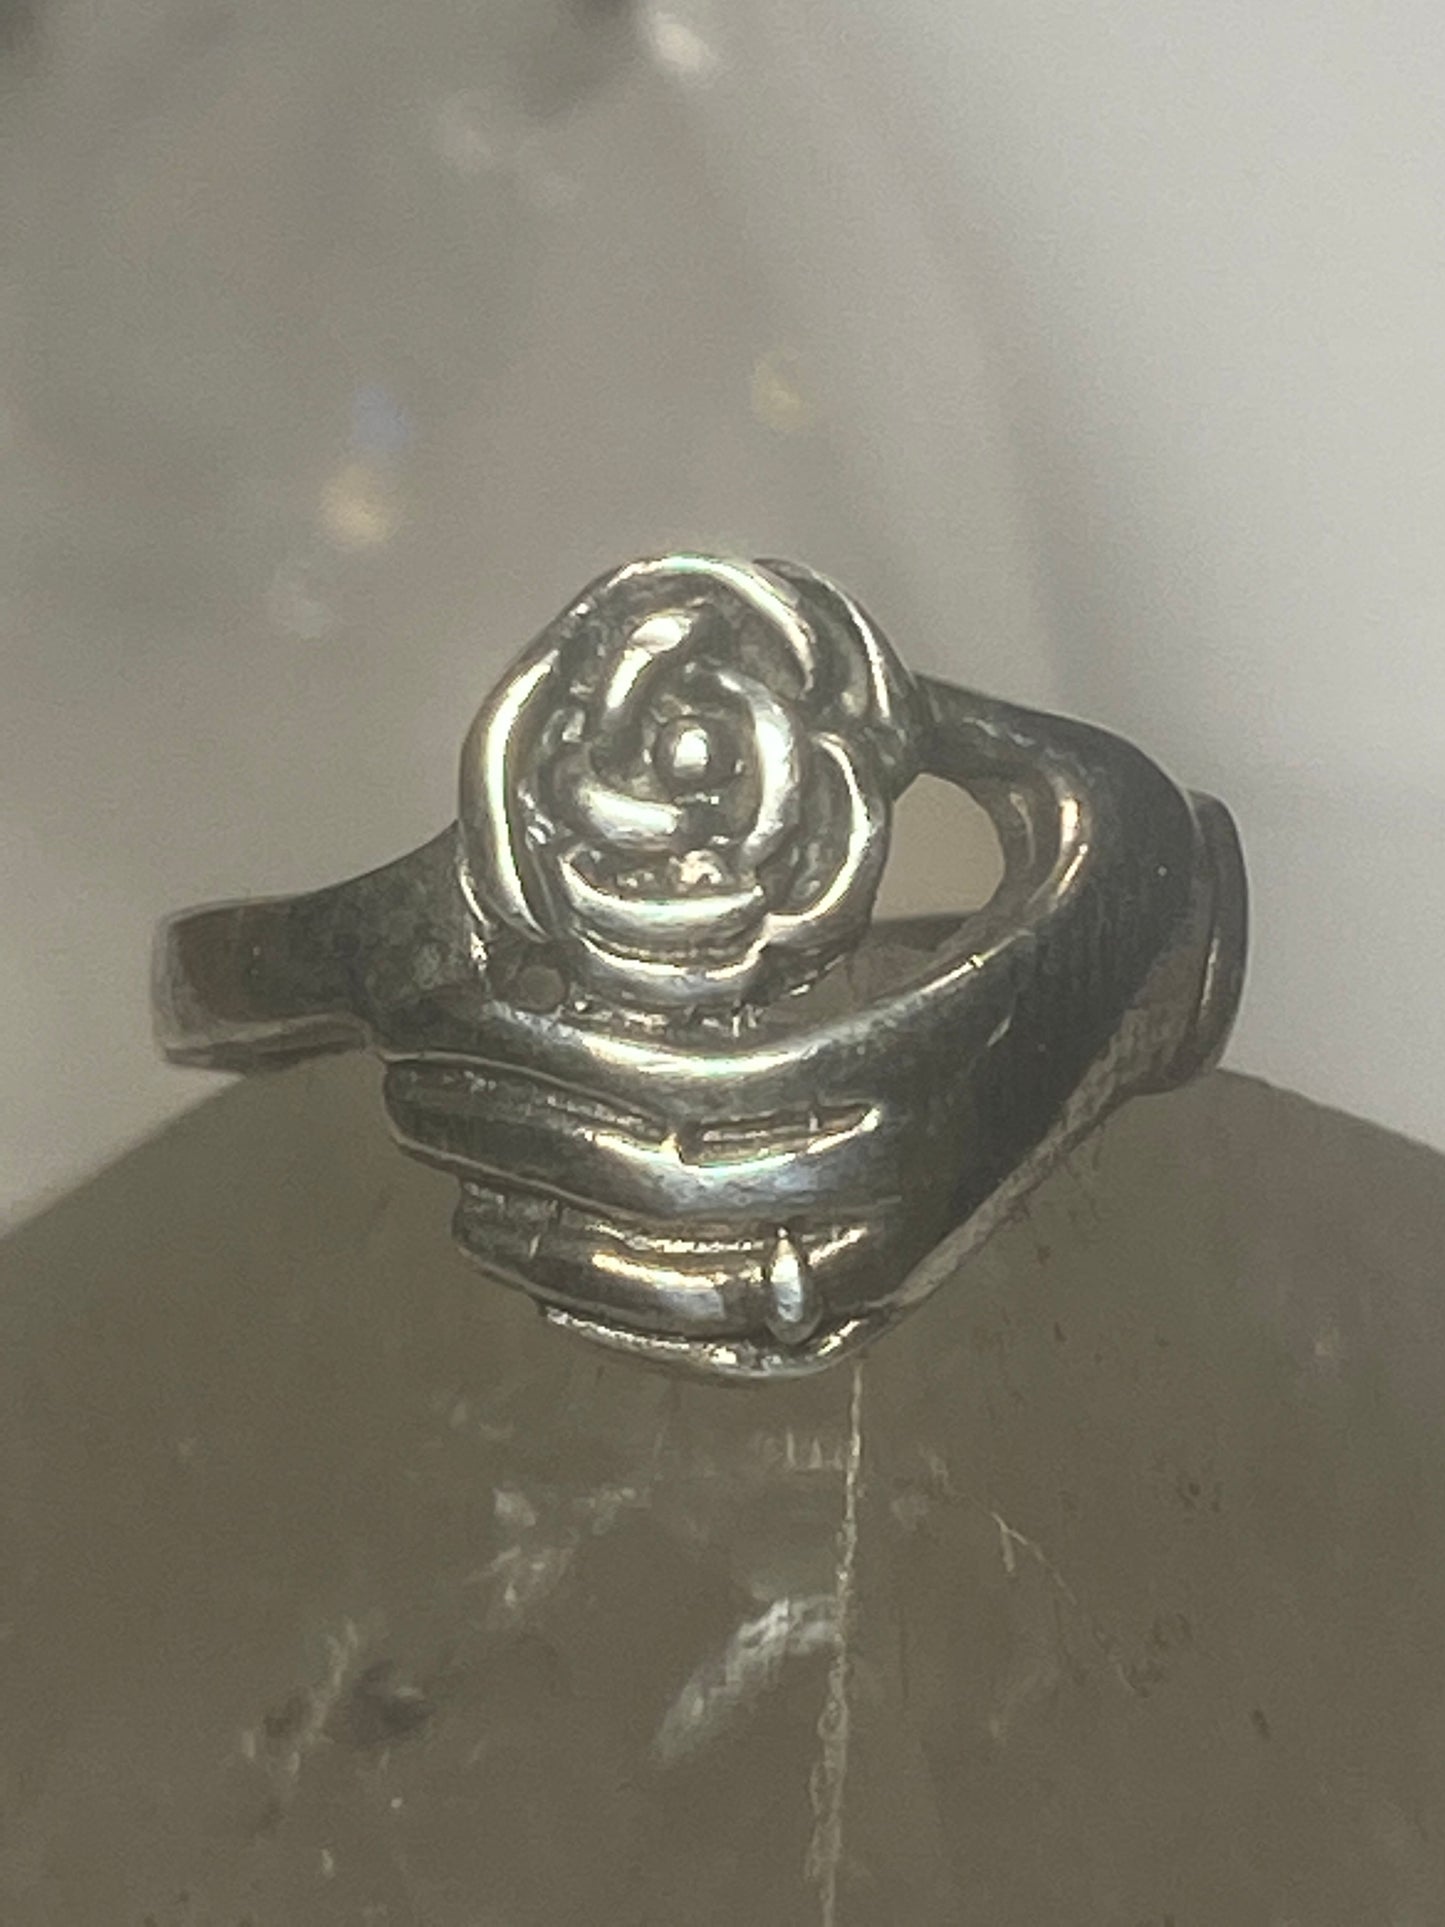 Hand ring rose pinky flower floral band boho sterling silver women girls